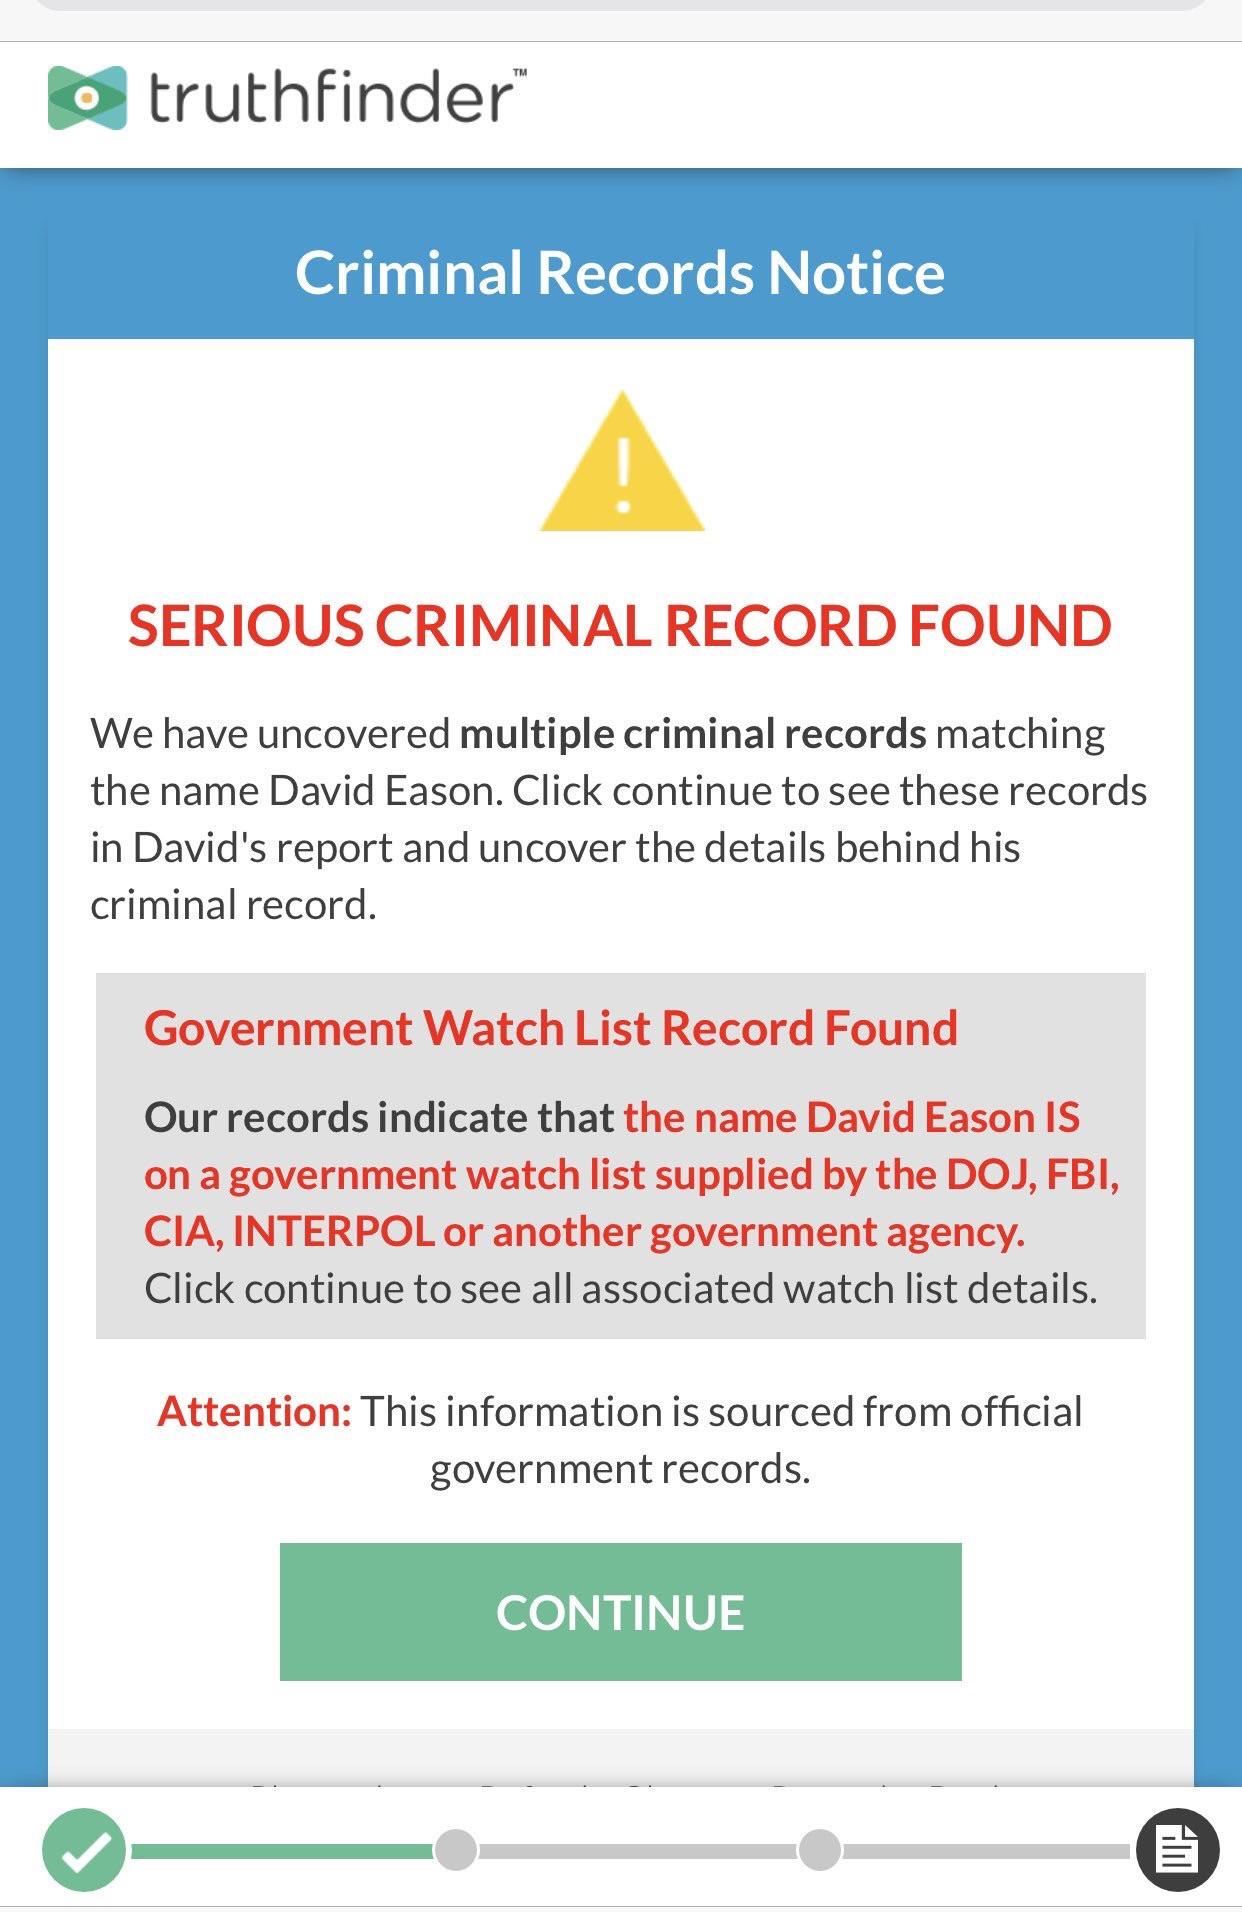 OMG David is on the Government Watch List ...